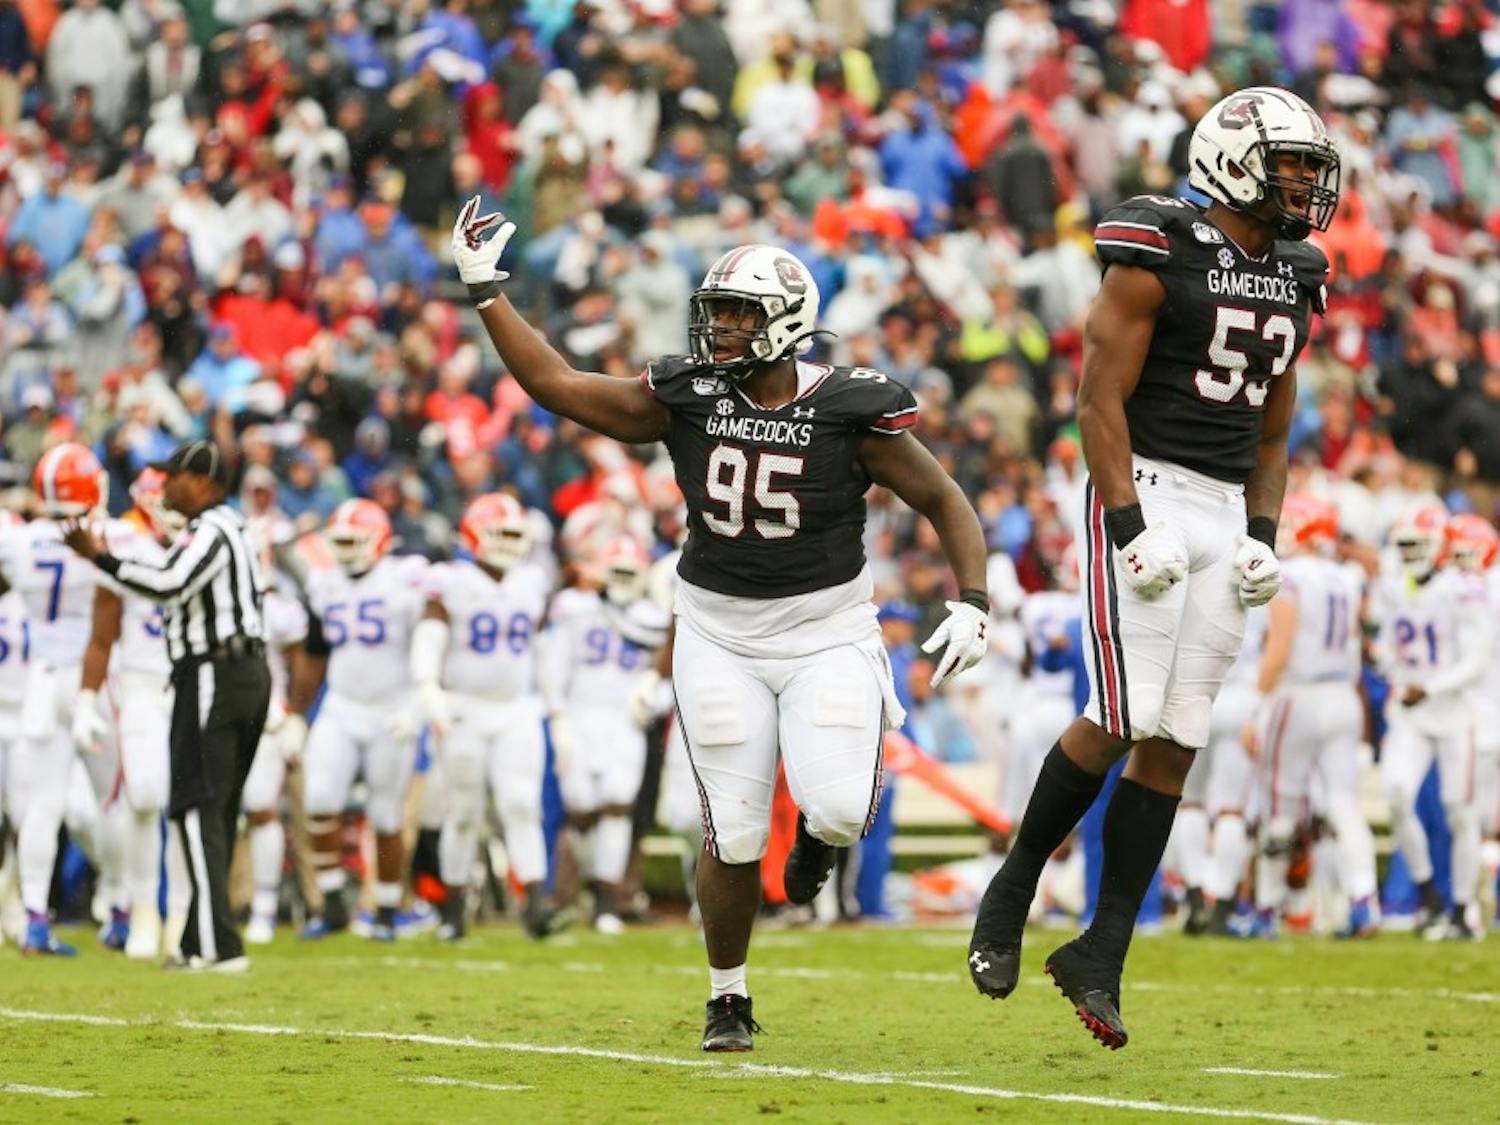 Senior defensive lineman Kobe Smith (left) and sophomore linebacker Ernest Jones (right) celebrate a touchdown during the game against Florida.